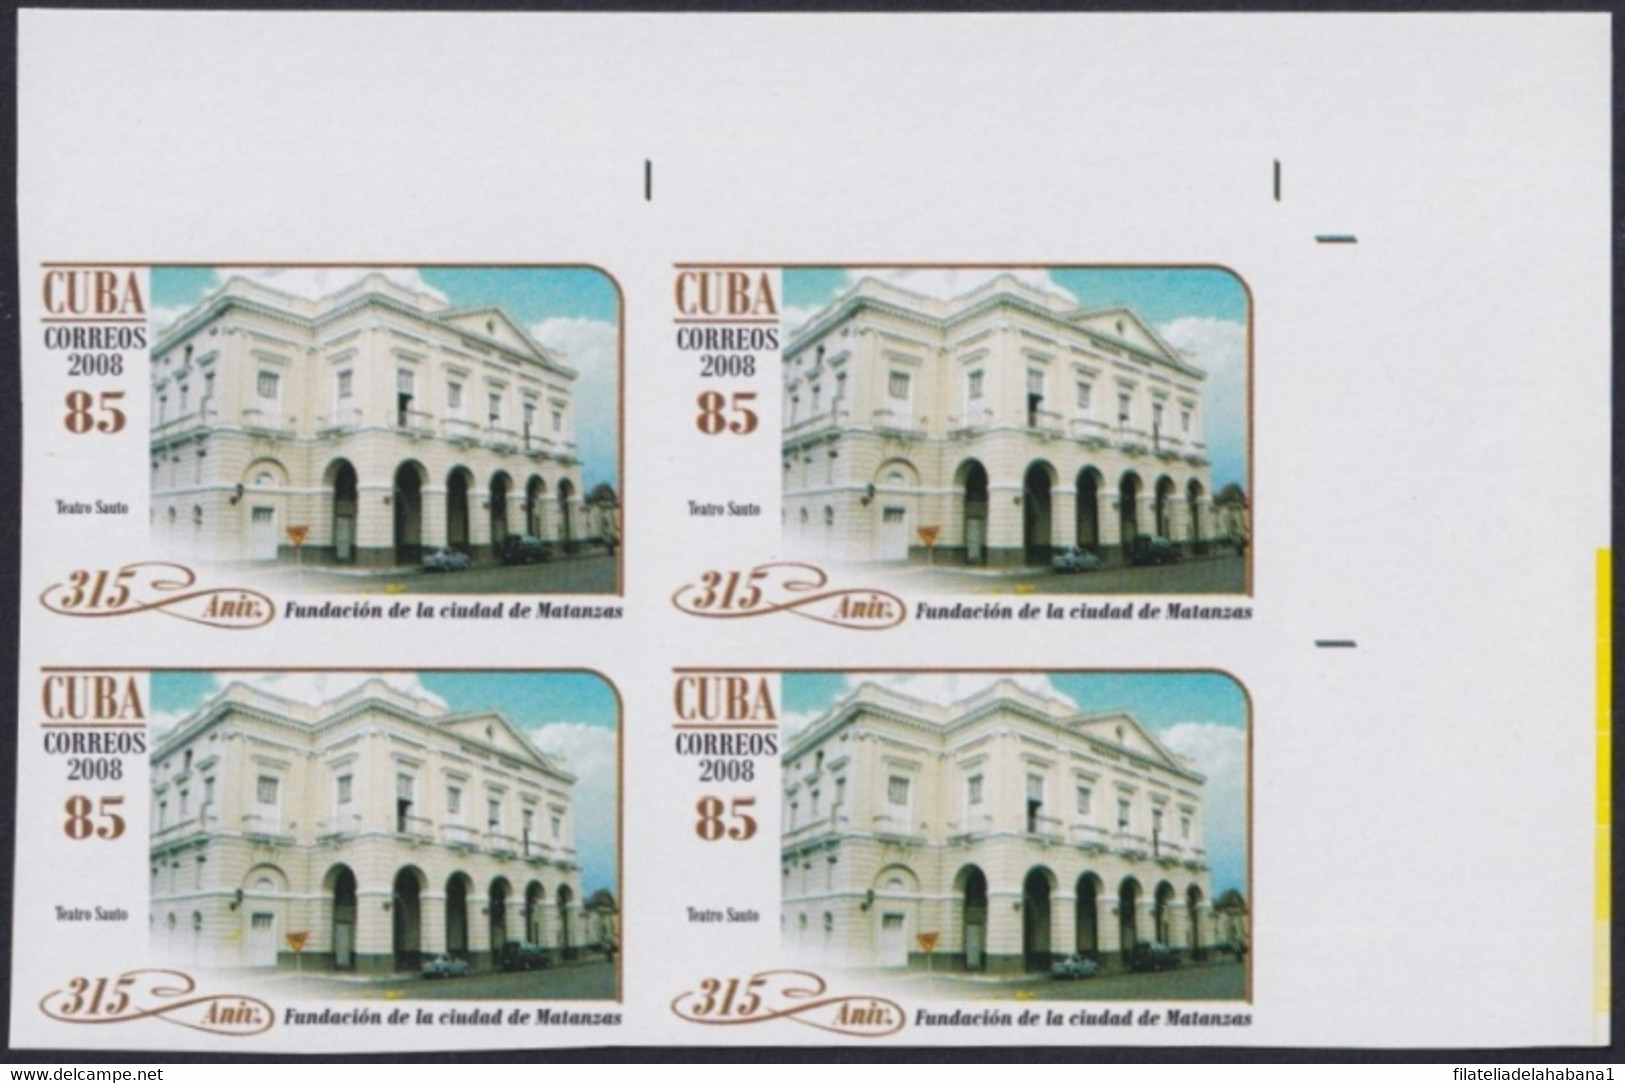 2008.413 CUBA 2008 85c MNH IMPERFORATED PROOF MATANZAS FOUNDATION SAUTO TEATHER. - Imperforates, Proofs & Errors